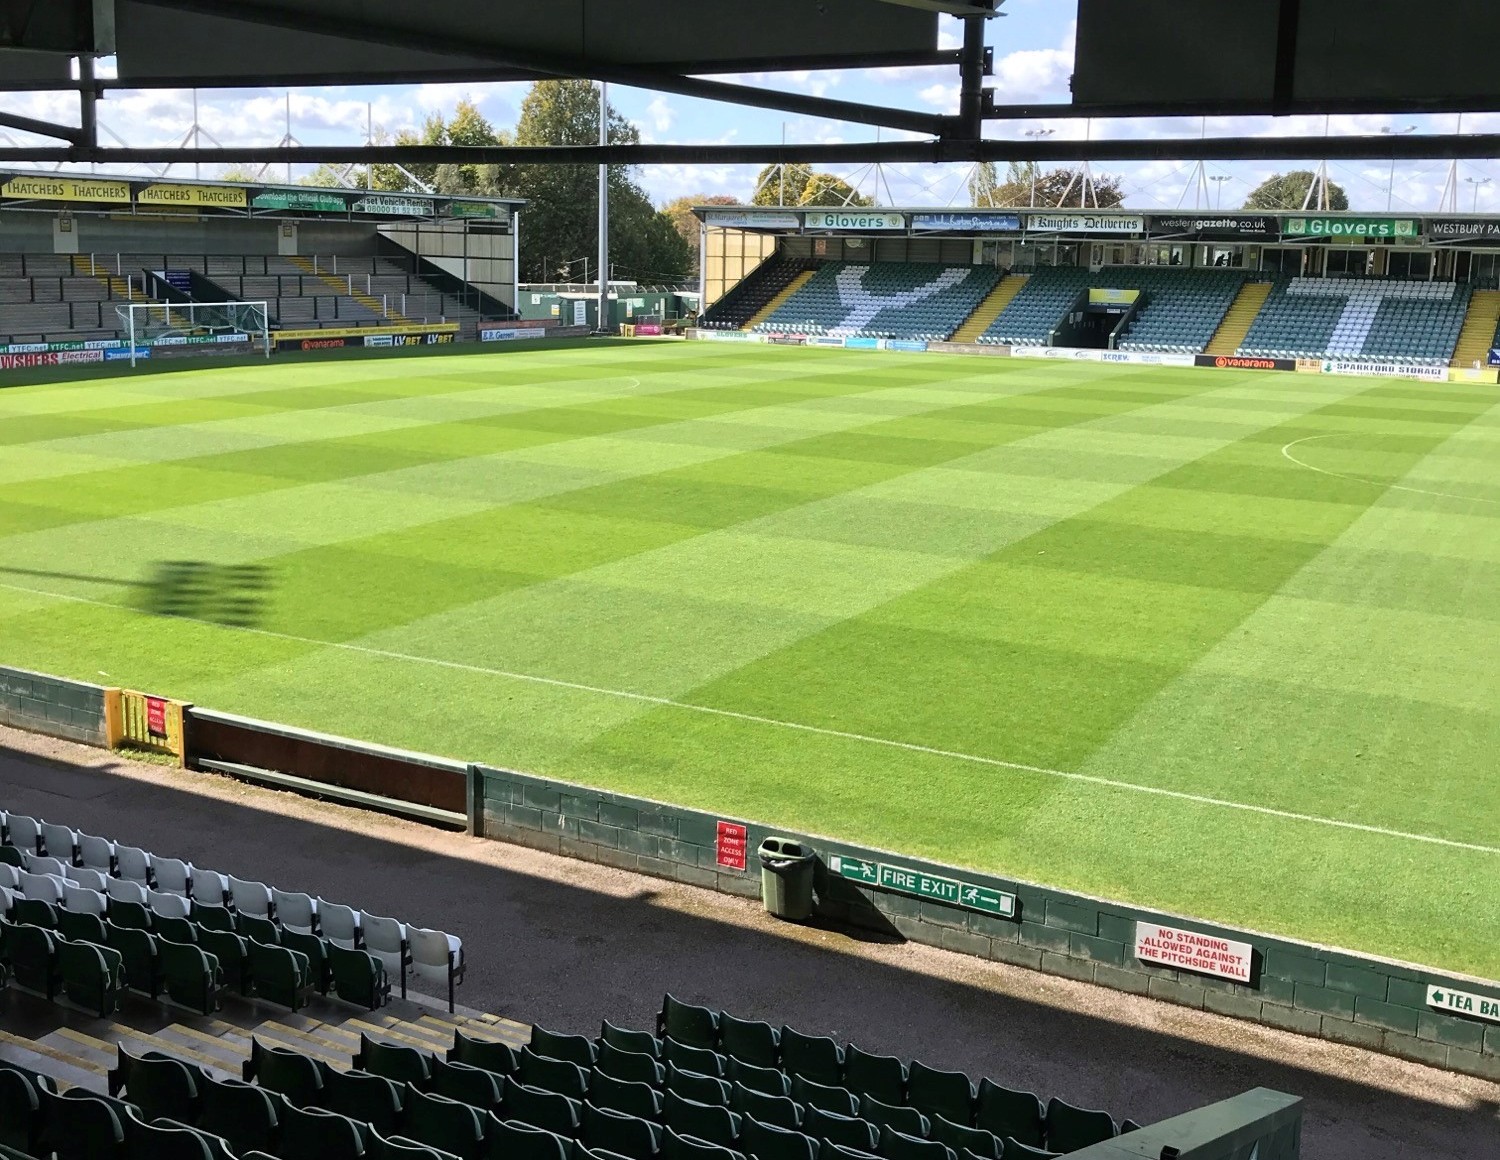 It's always been MM seed for Stuart Antell at Yeovil Town FC